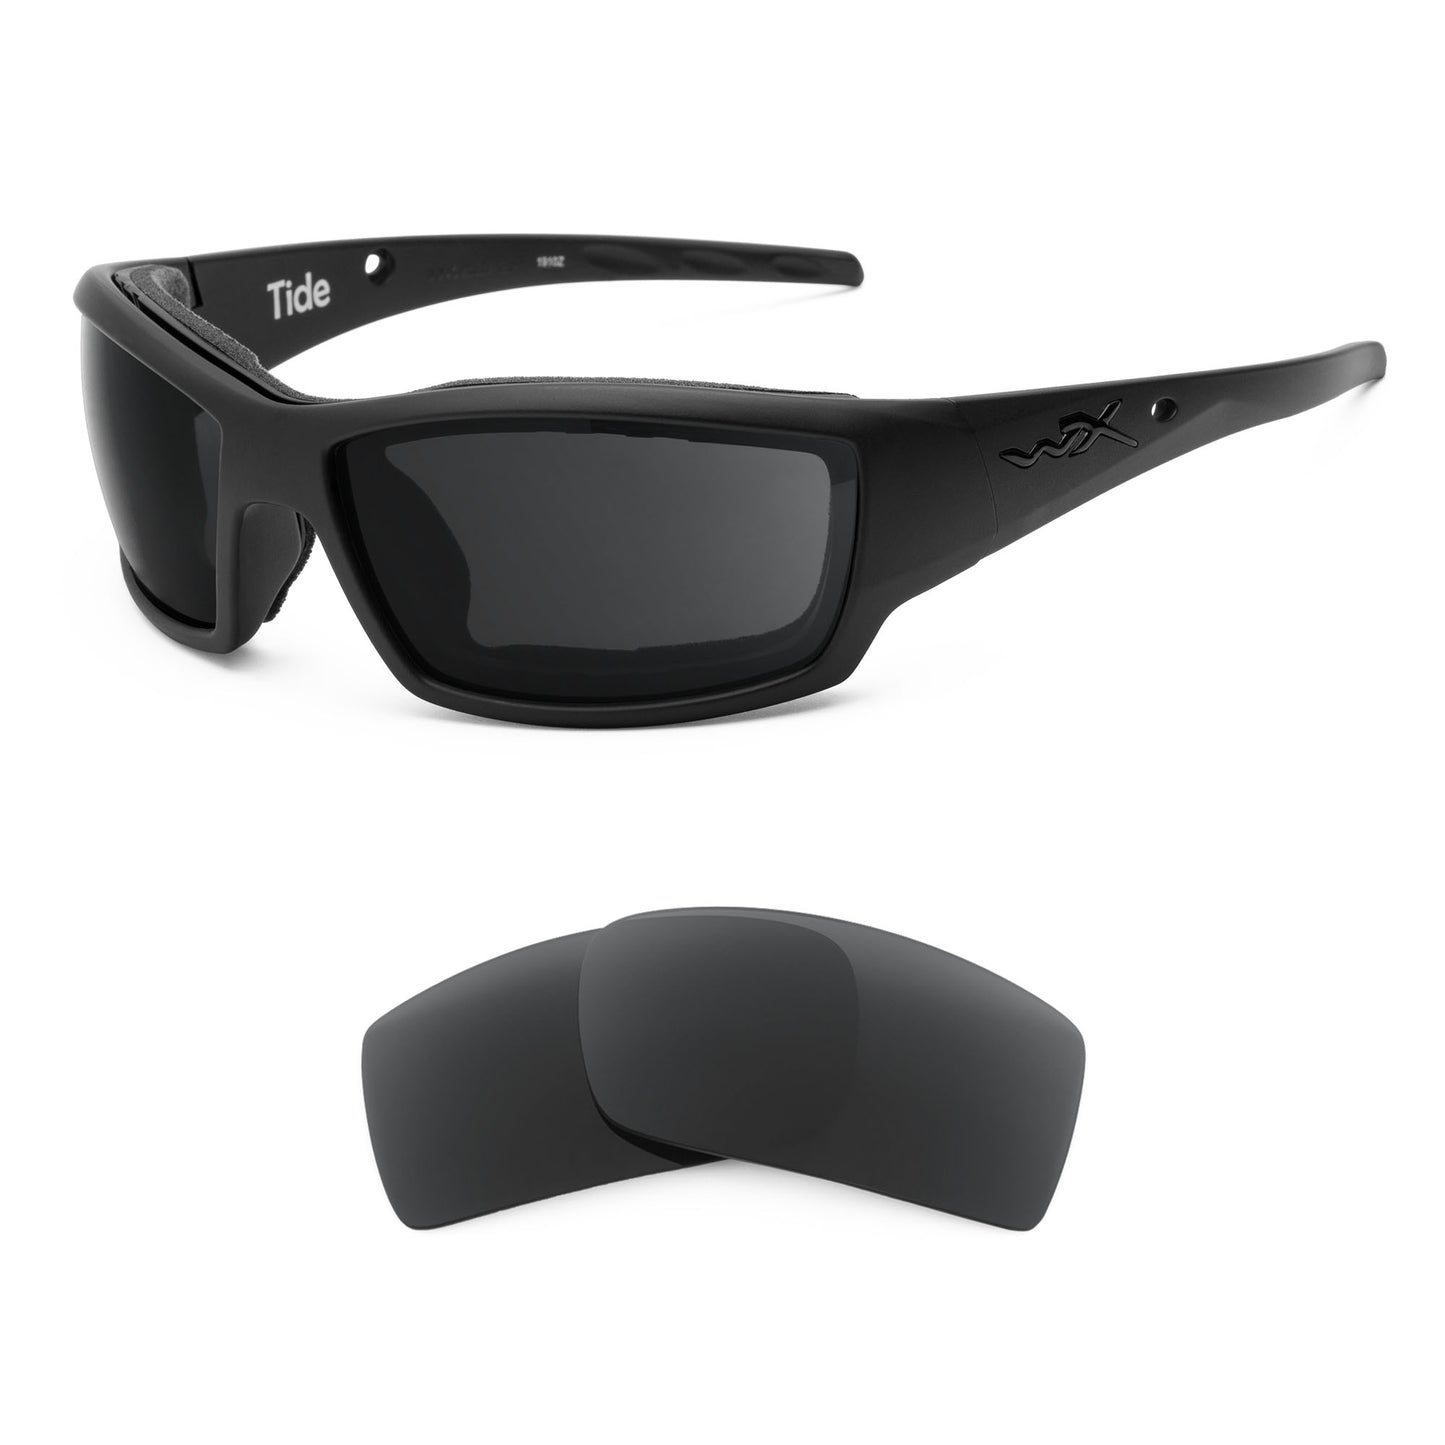 Wiley X Tide sunglasses with replacement lenses